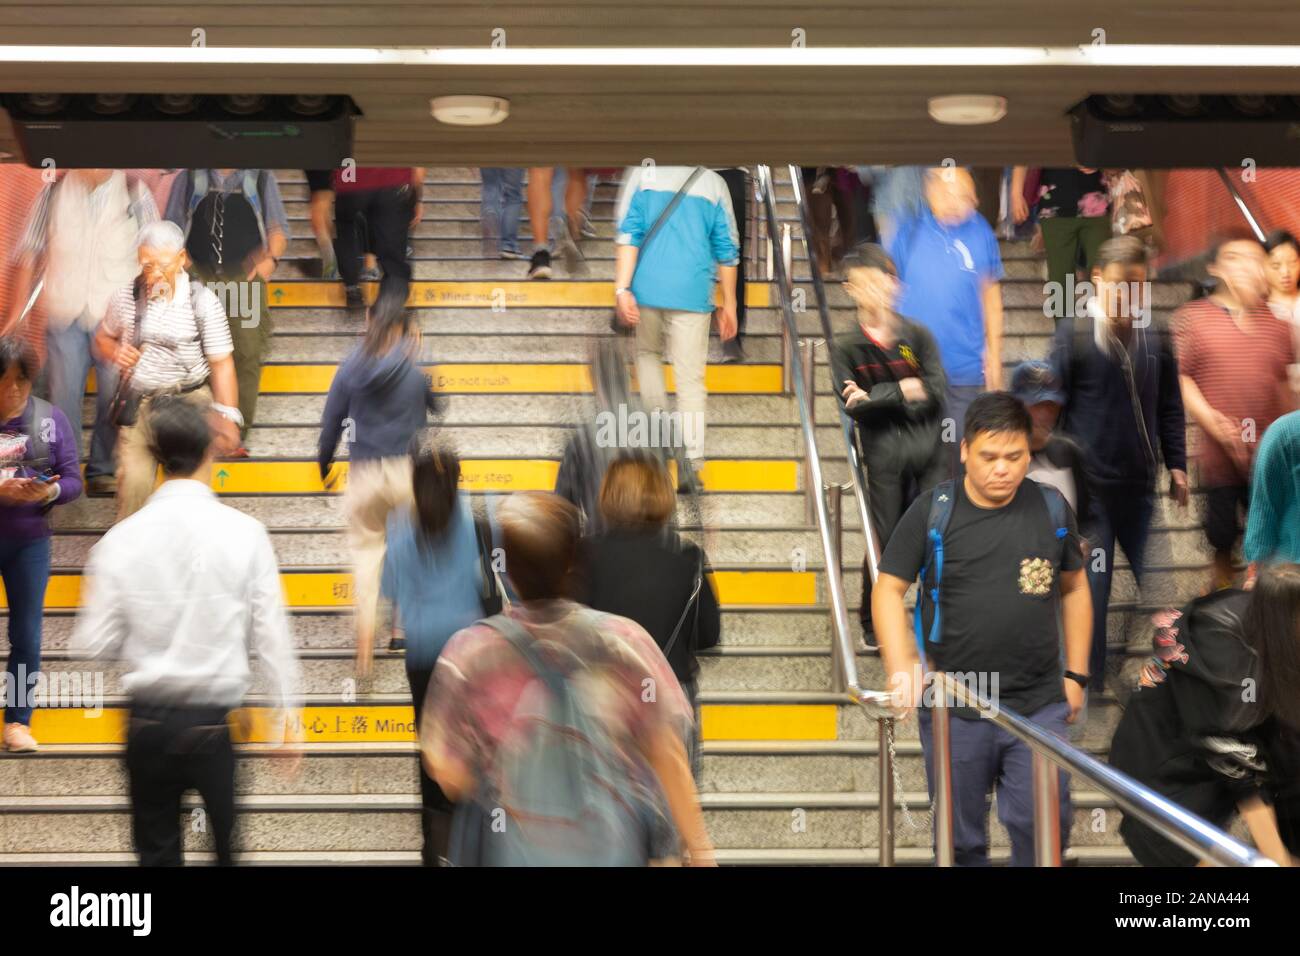 Hong Kong people - motion blur image of people on a stairway - concept of busy everyday life and Hong Kong lifestyle, Kowloon Hong Kong Asia Stock Photo